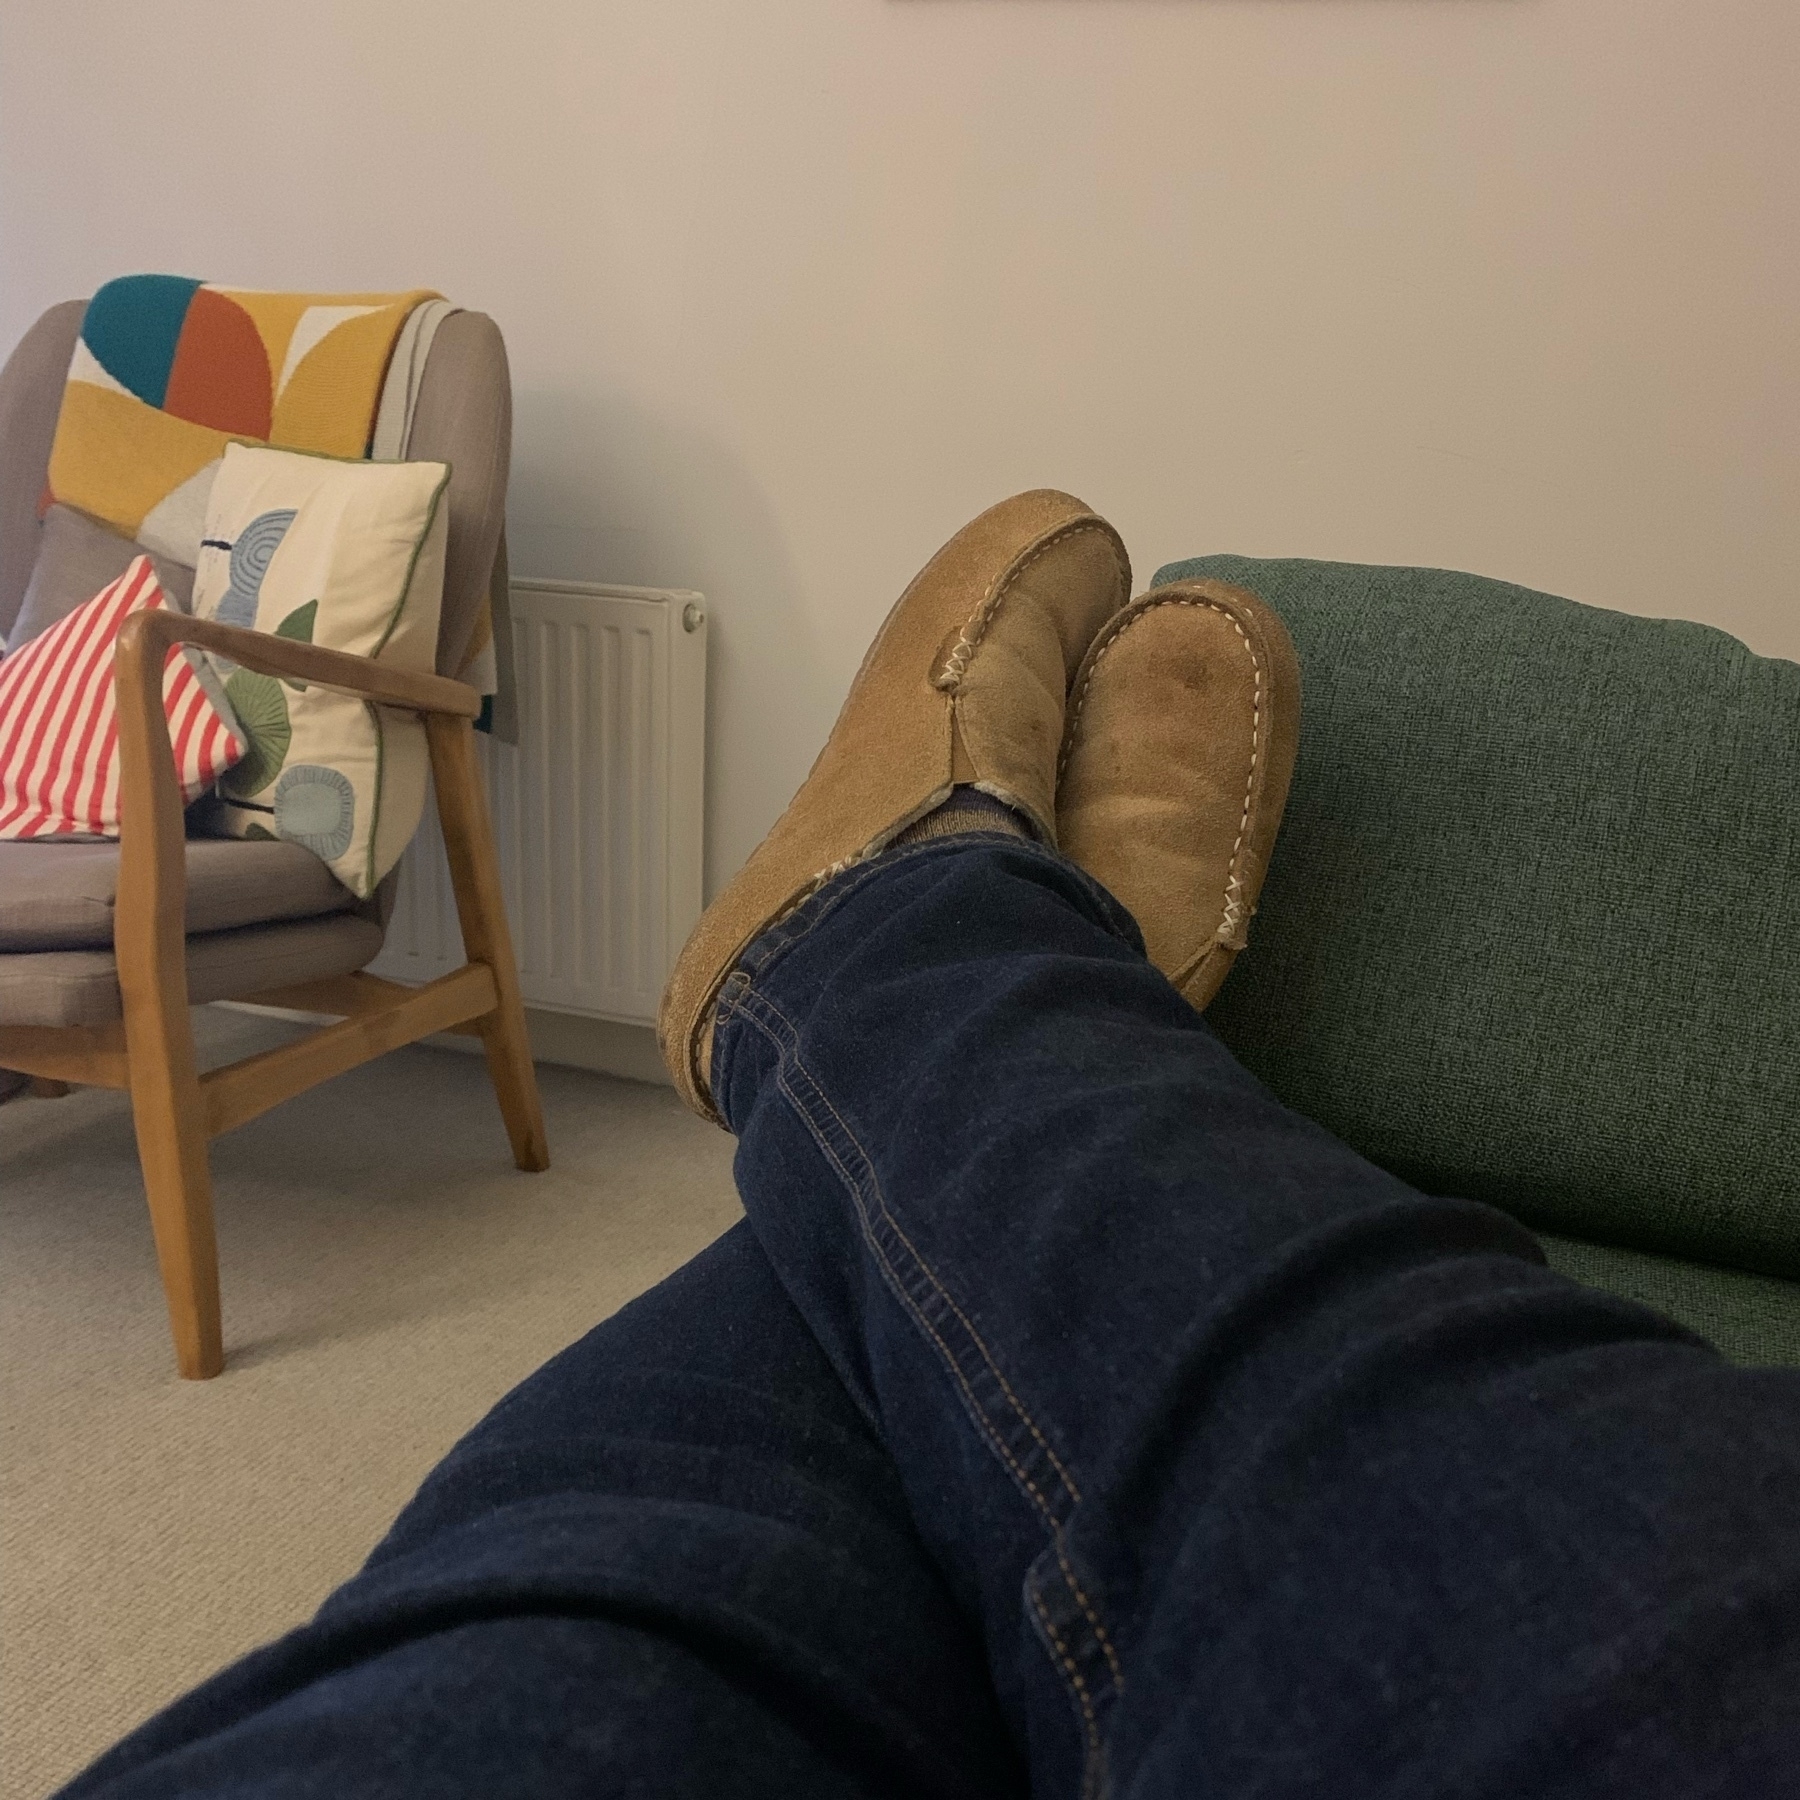 Crossed legs in dark blue jeans and suede slippers. Armchair in background